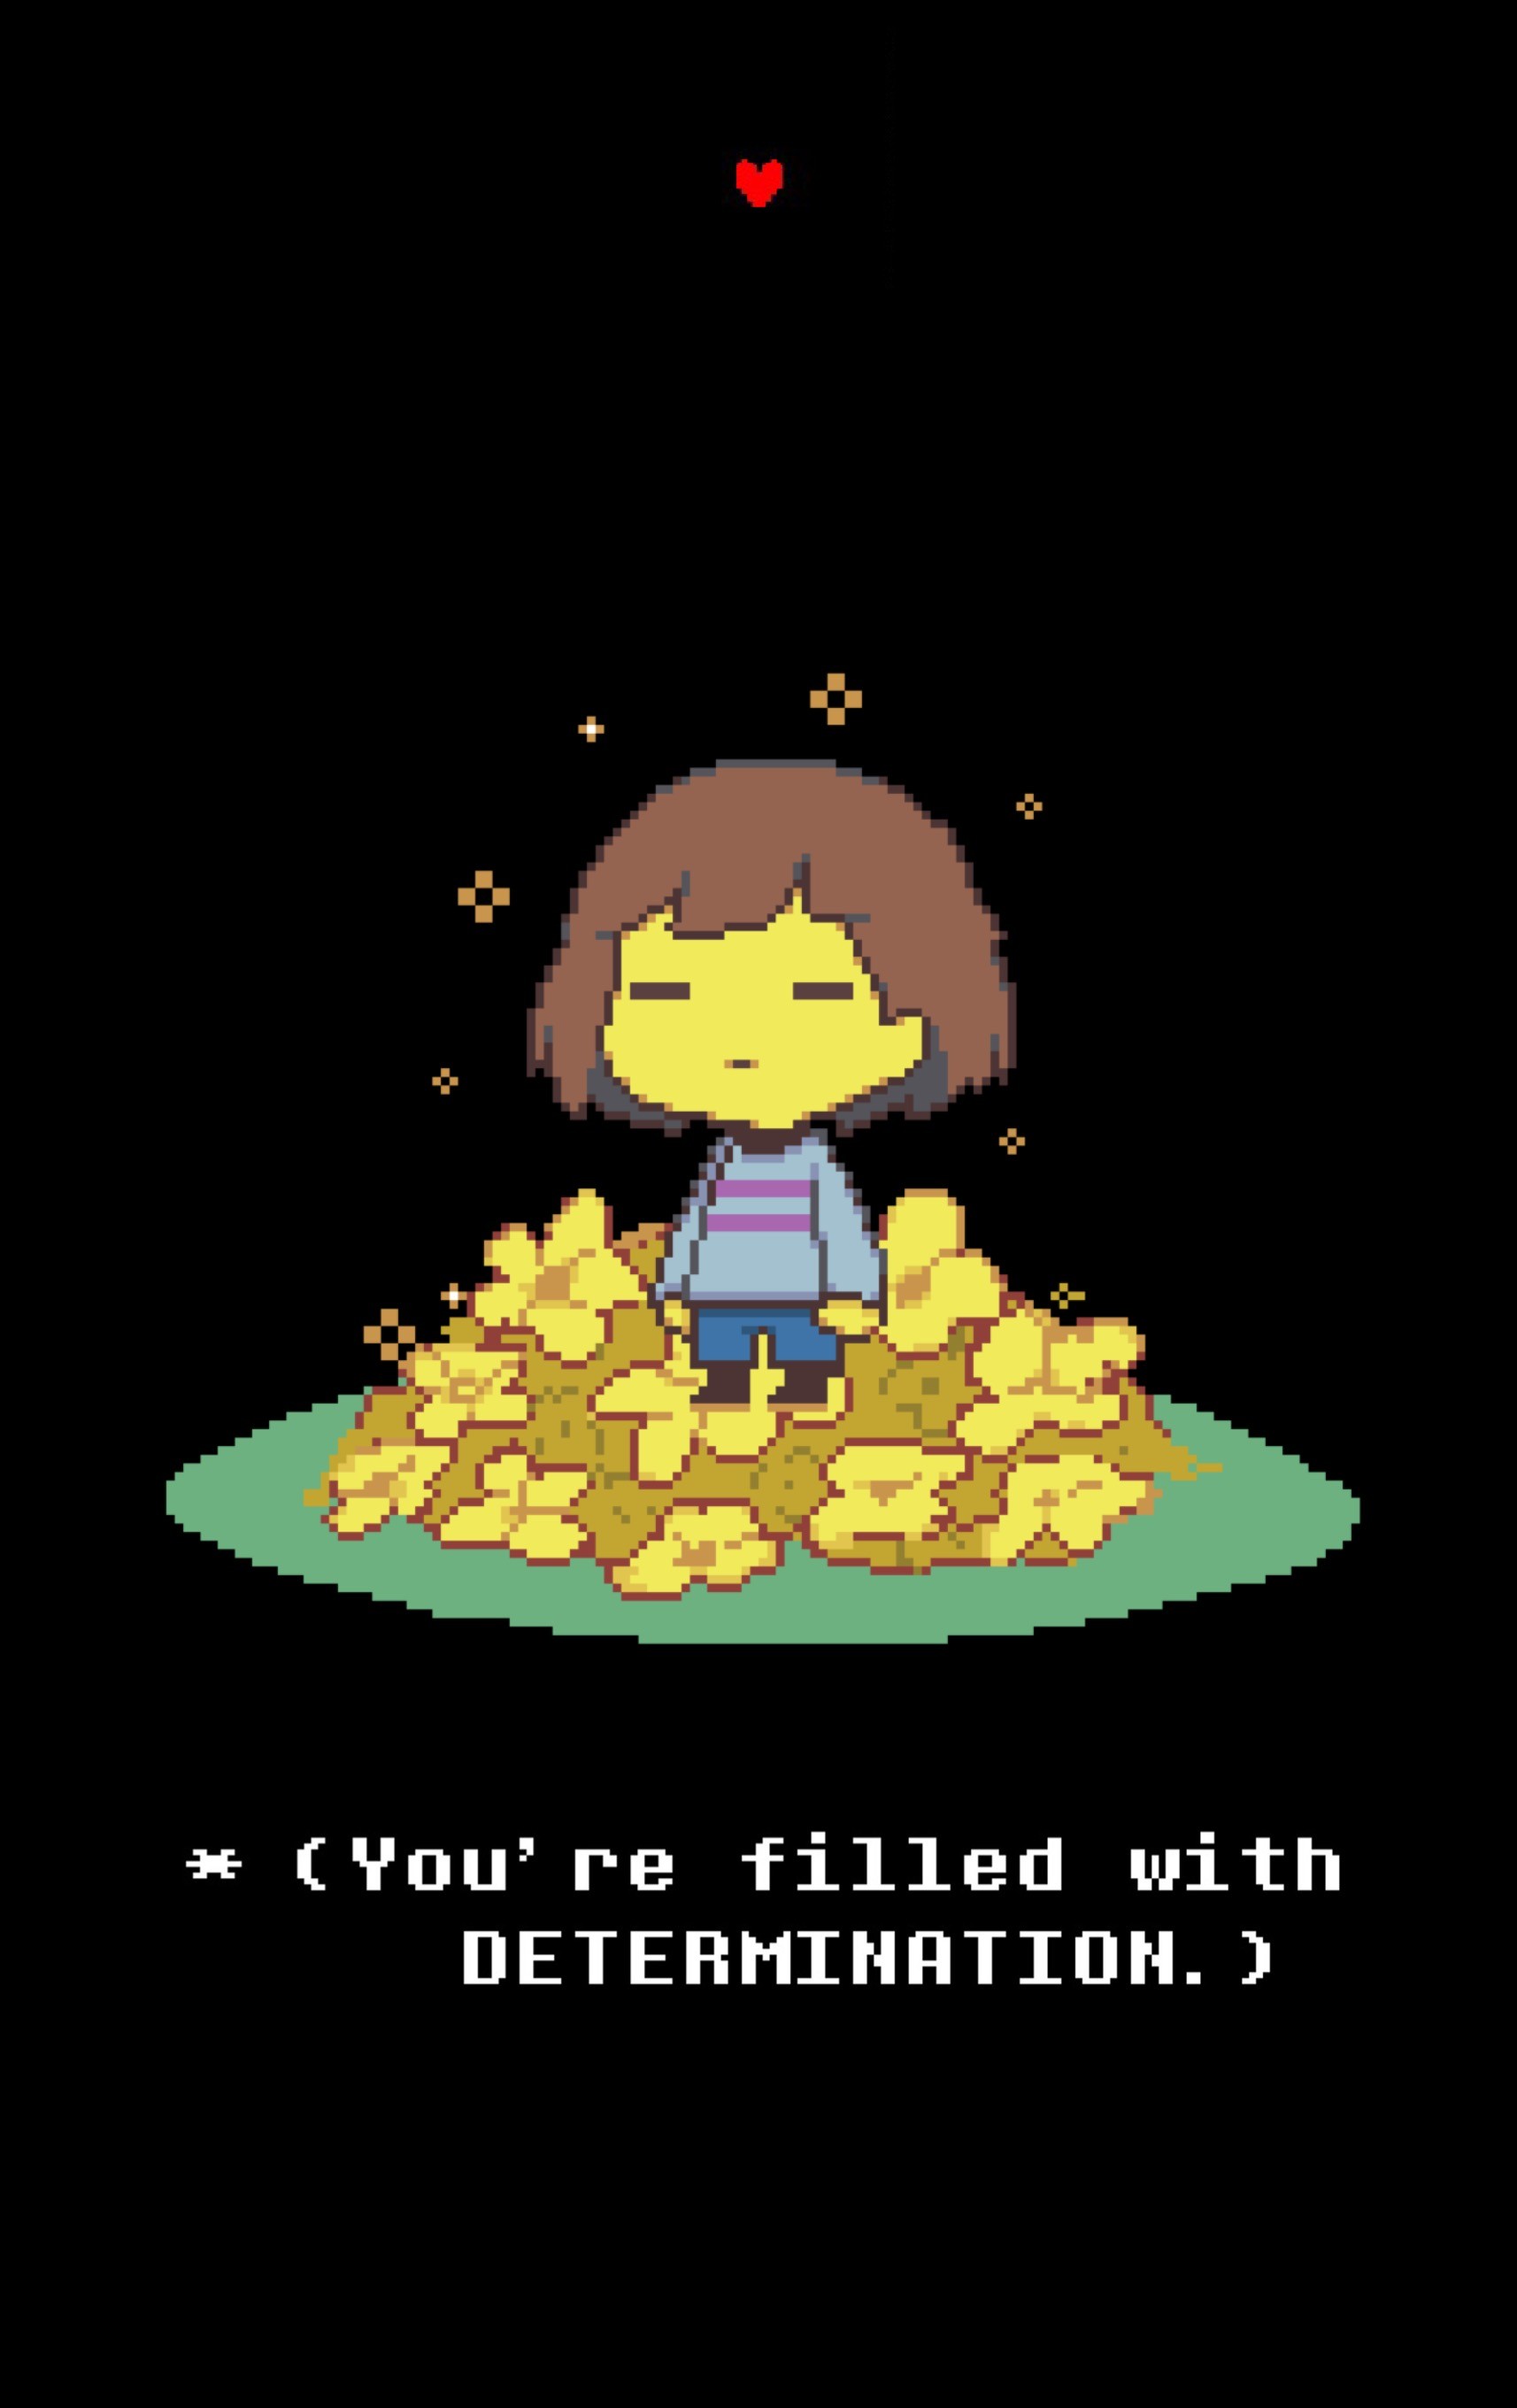 Undertale phone wallpaper ·① Download free backgrounds for desktop and